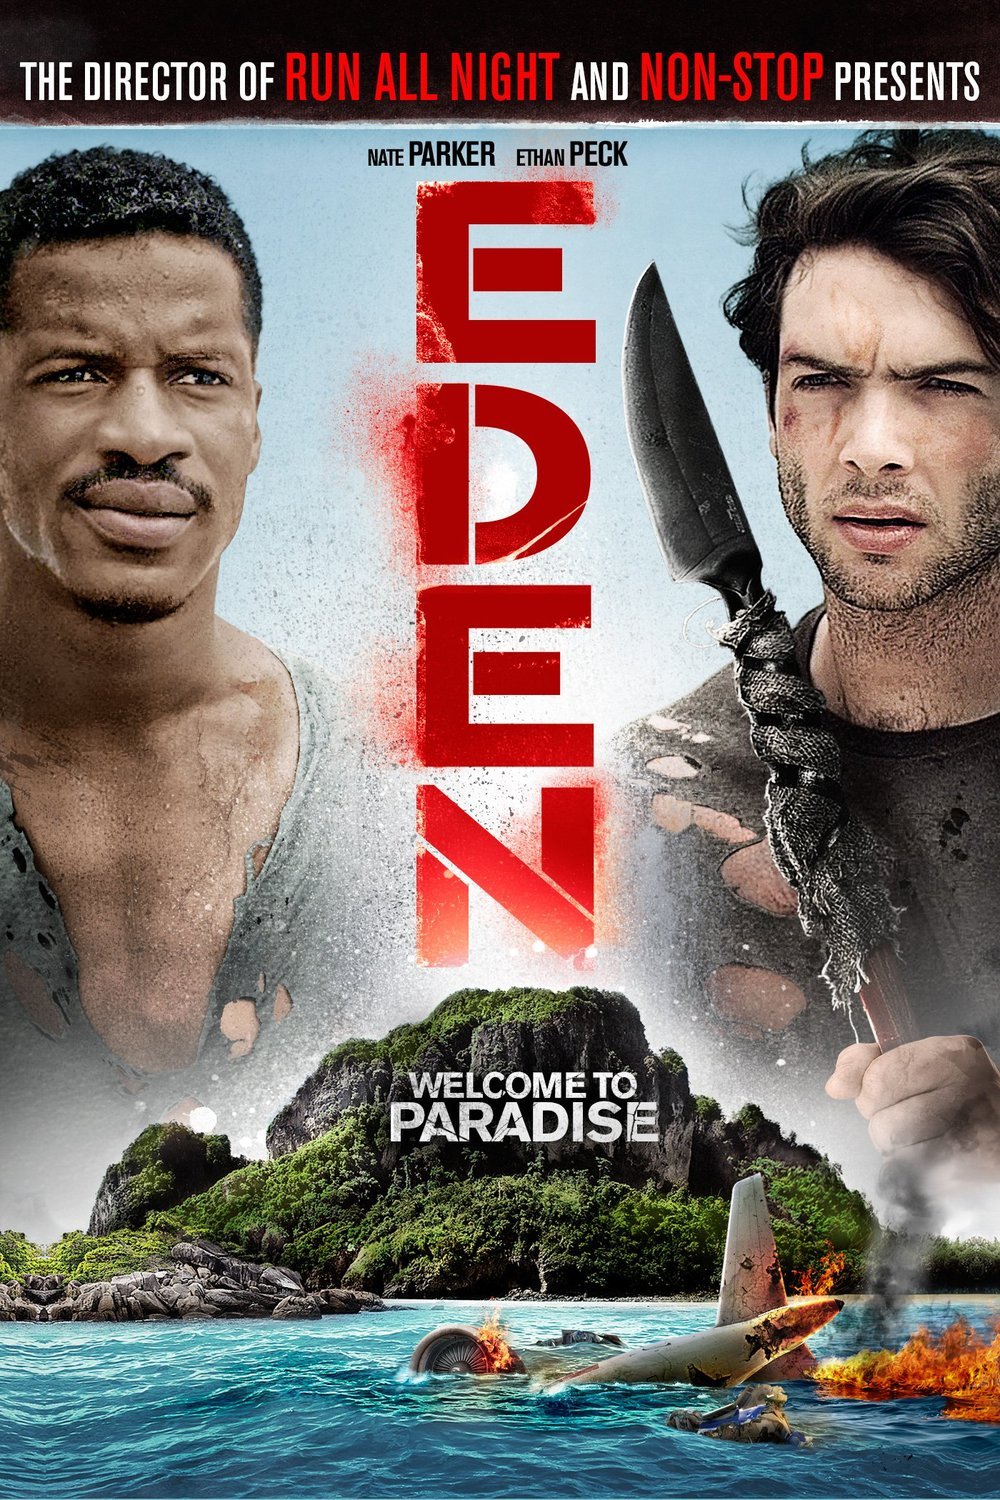 Poster of the movie Eden